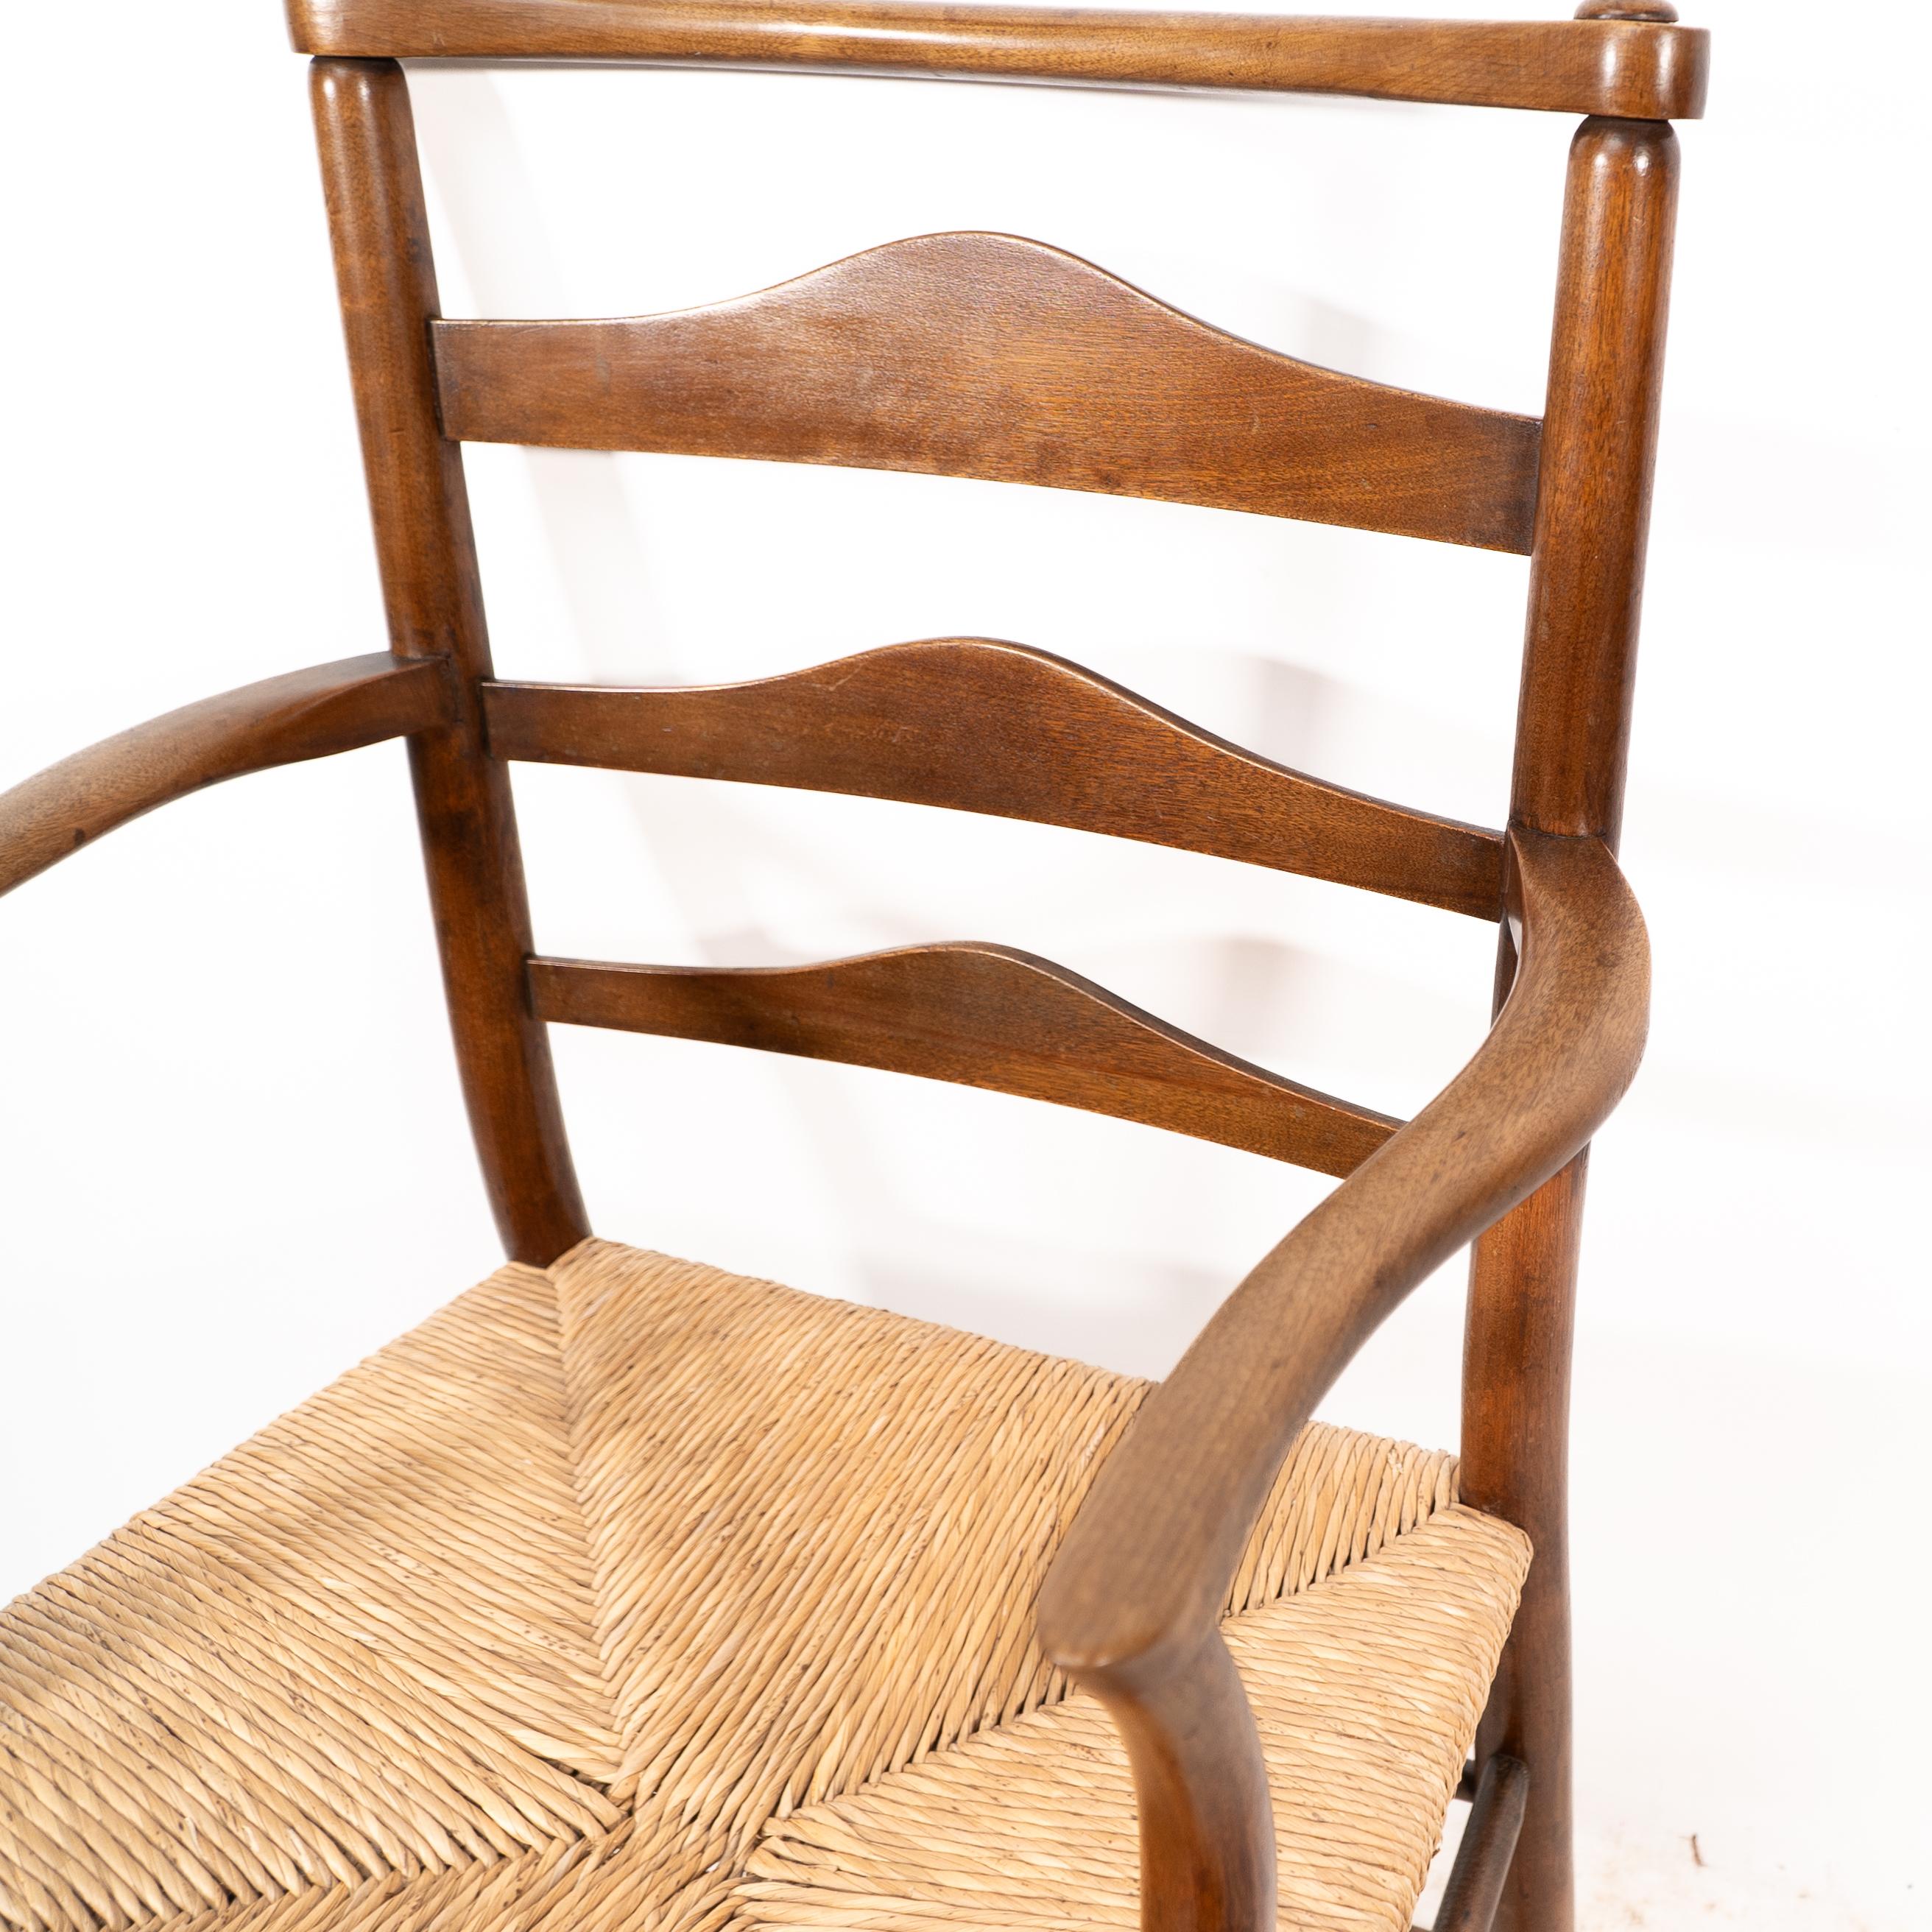 C R Ashbee. An Arts and Crafts rush seat ladder back armchair For Sale 5